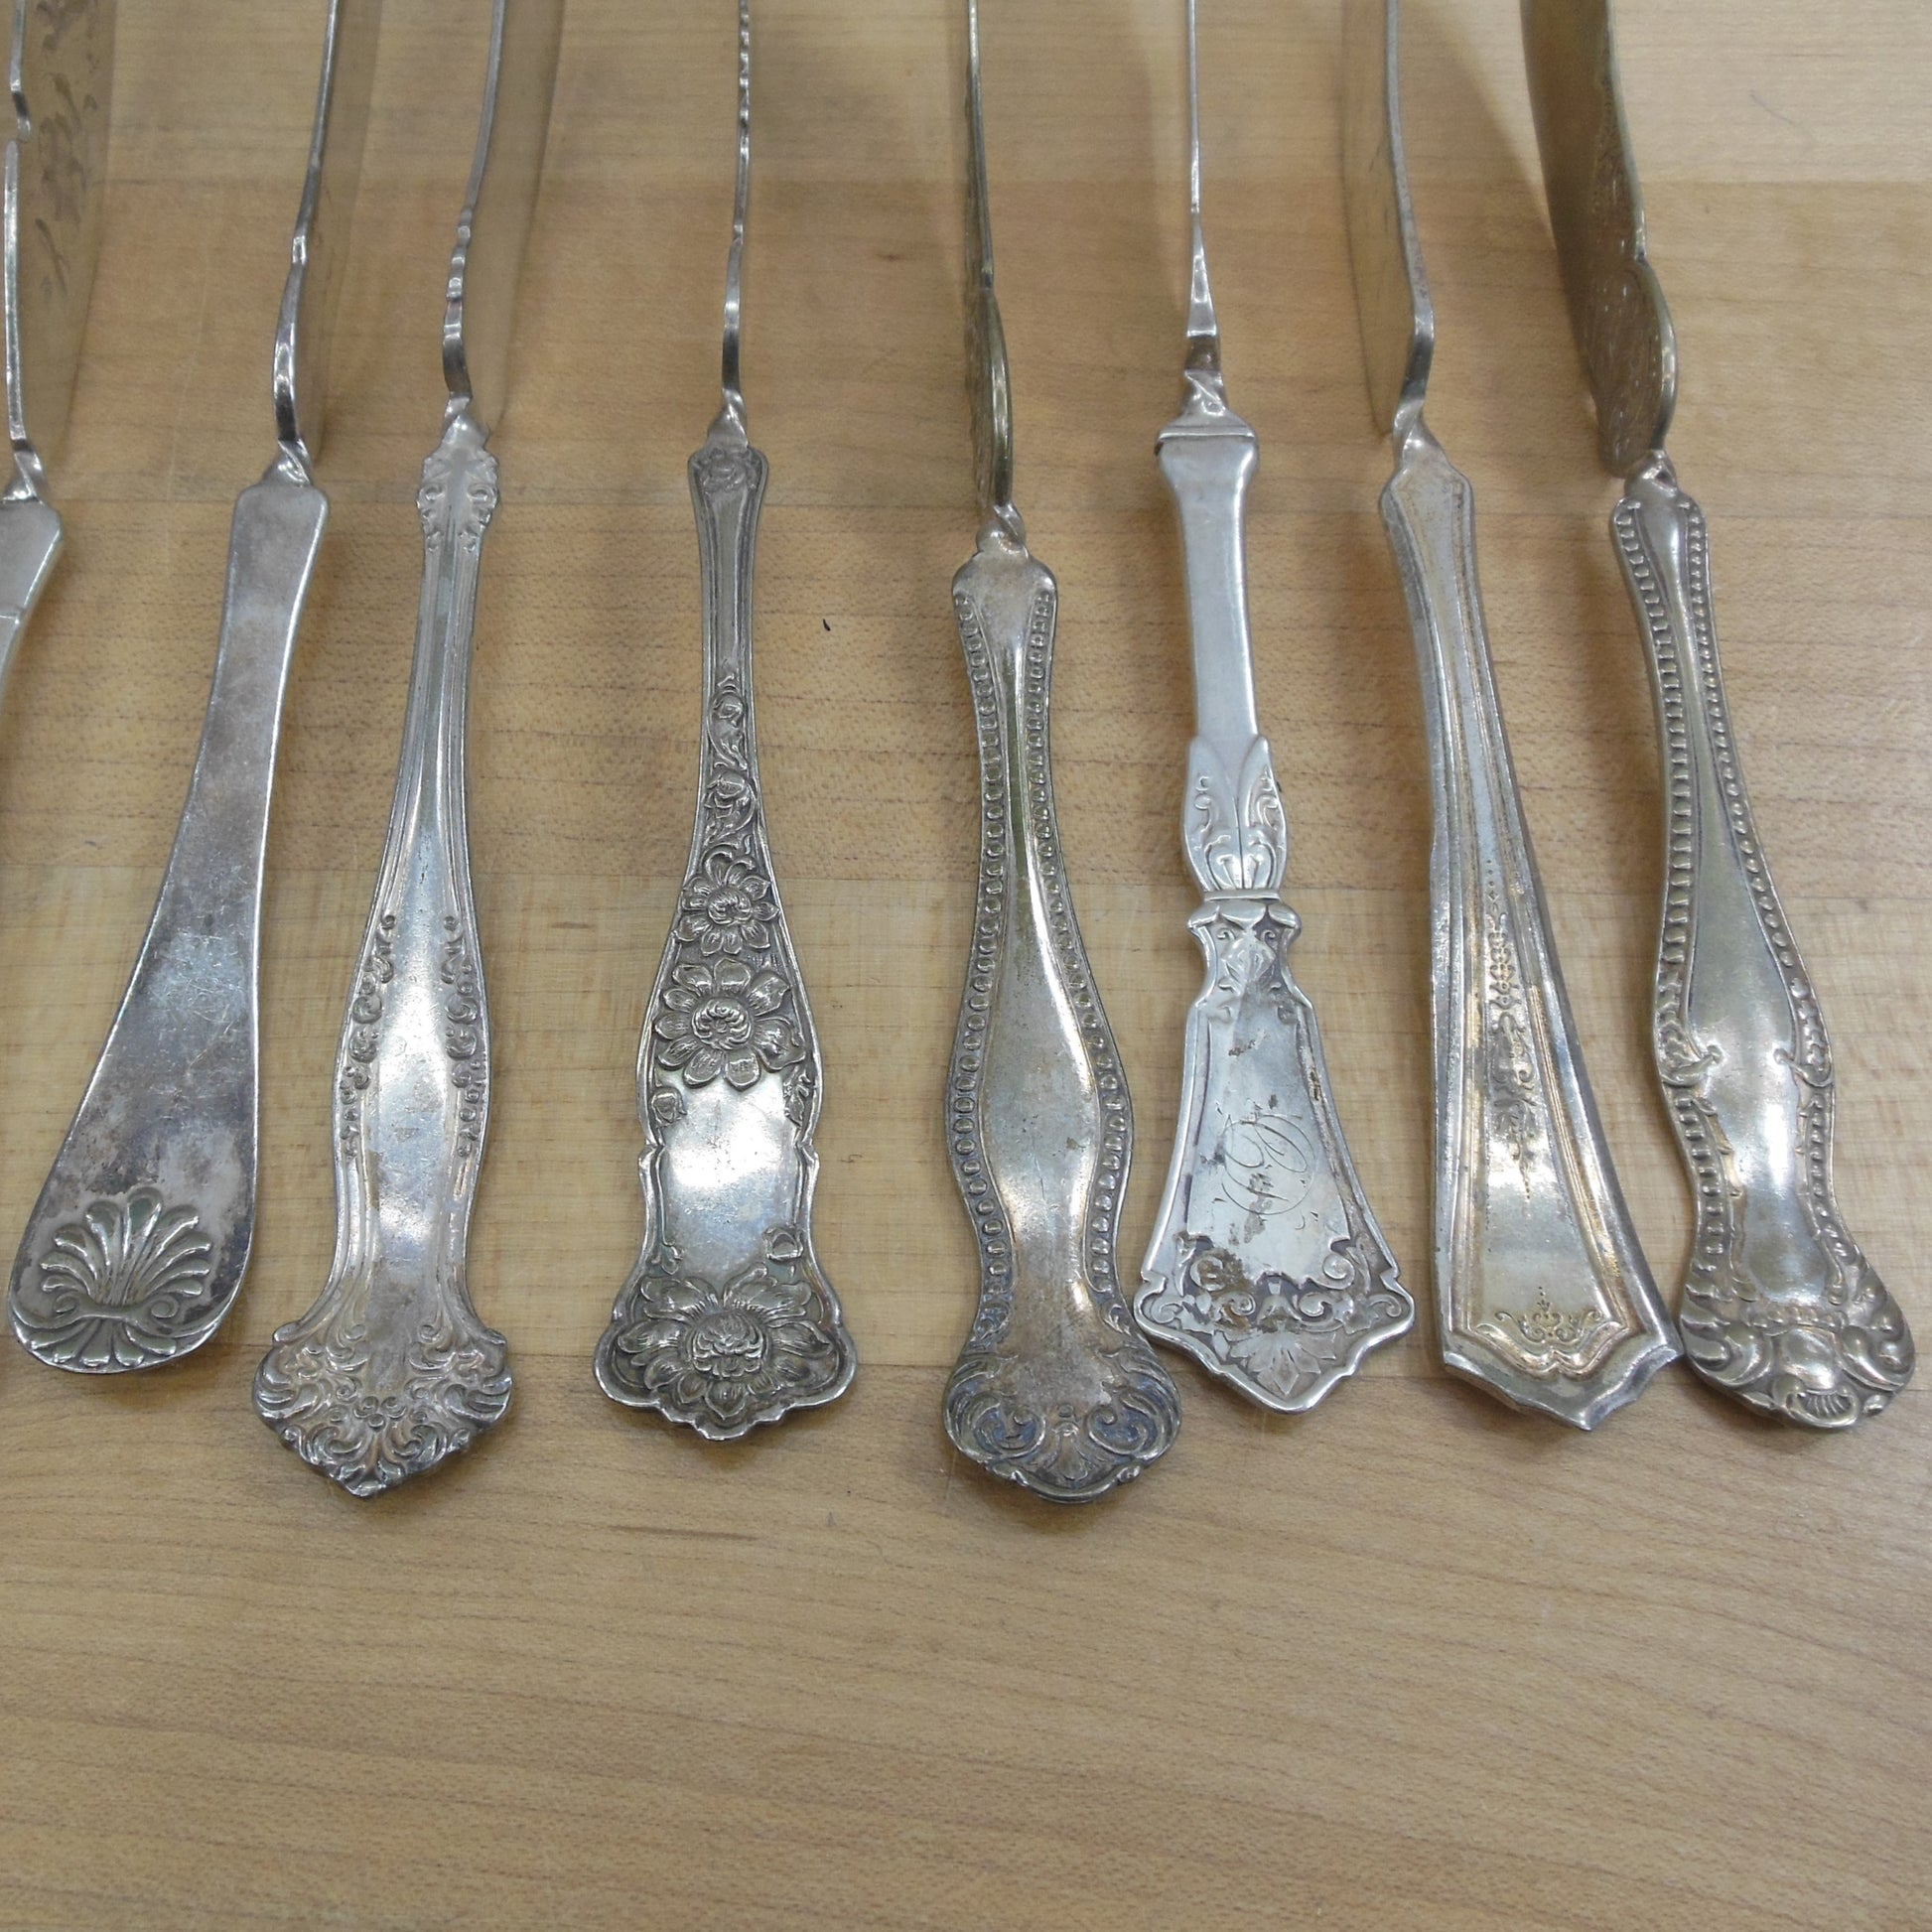 Antique Mixed Master Collection 33 Silverplate Master Butter Knives Twist vintage